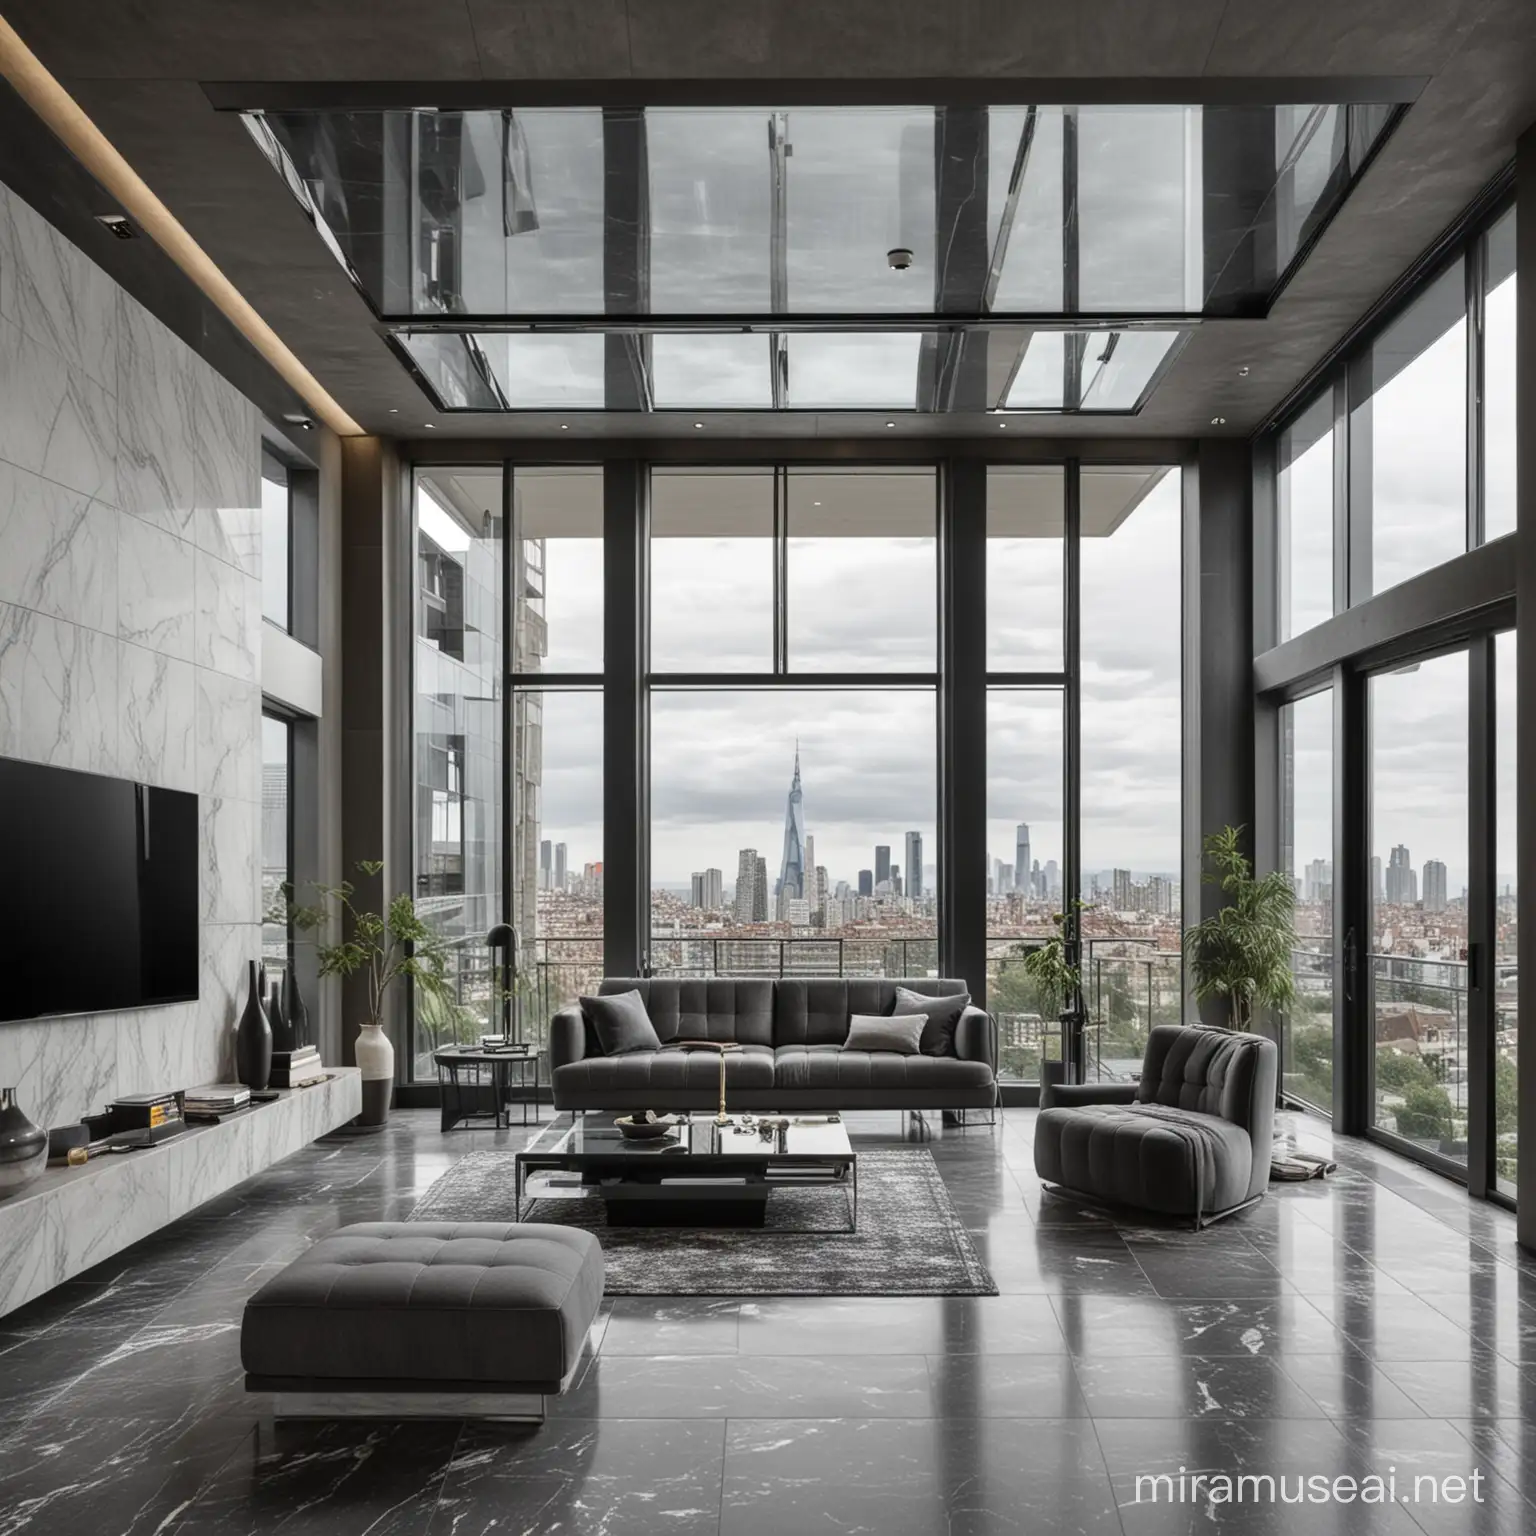 A modern living room with low ceiling, glass elevator in the center, and tiled walls touching the ceiling, 
A striking living room adorned with gray stone cladding, generally black and white modern color scheme, large glass windows looking out over the city